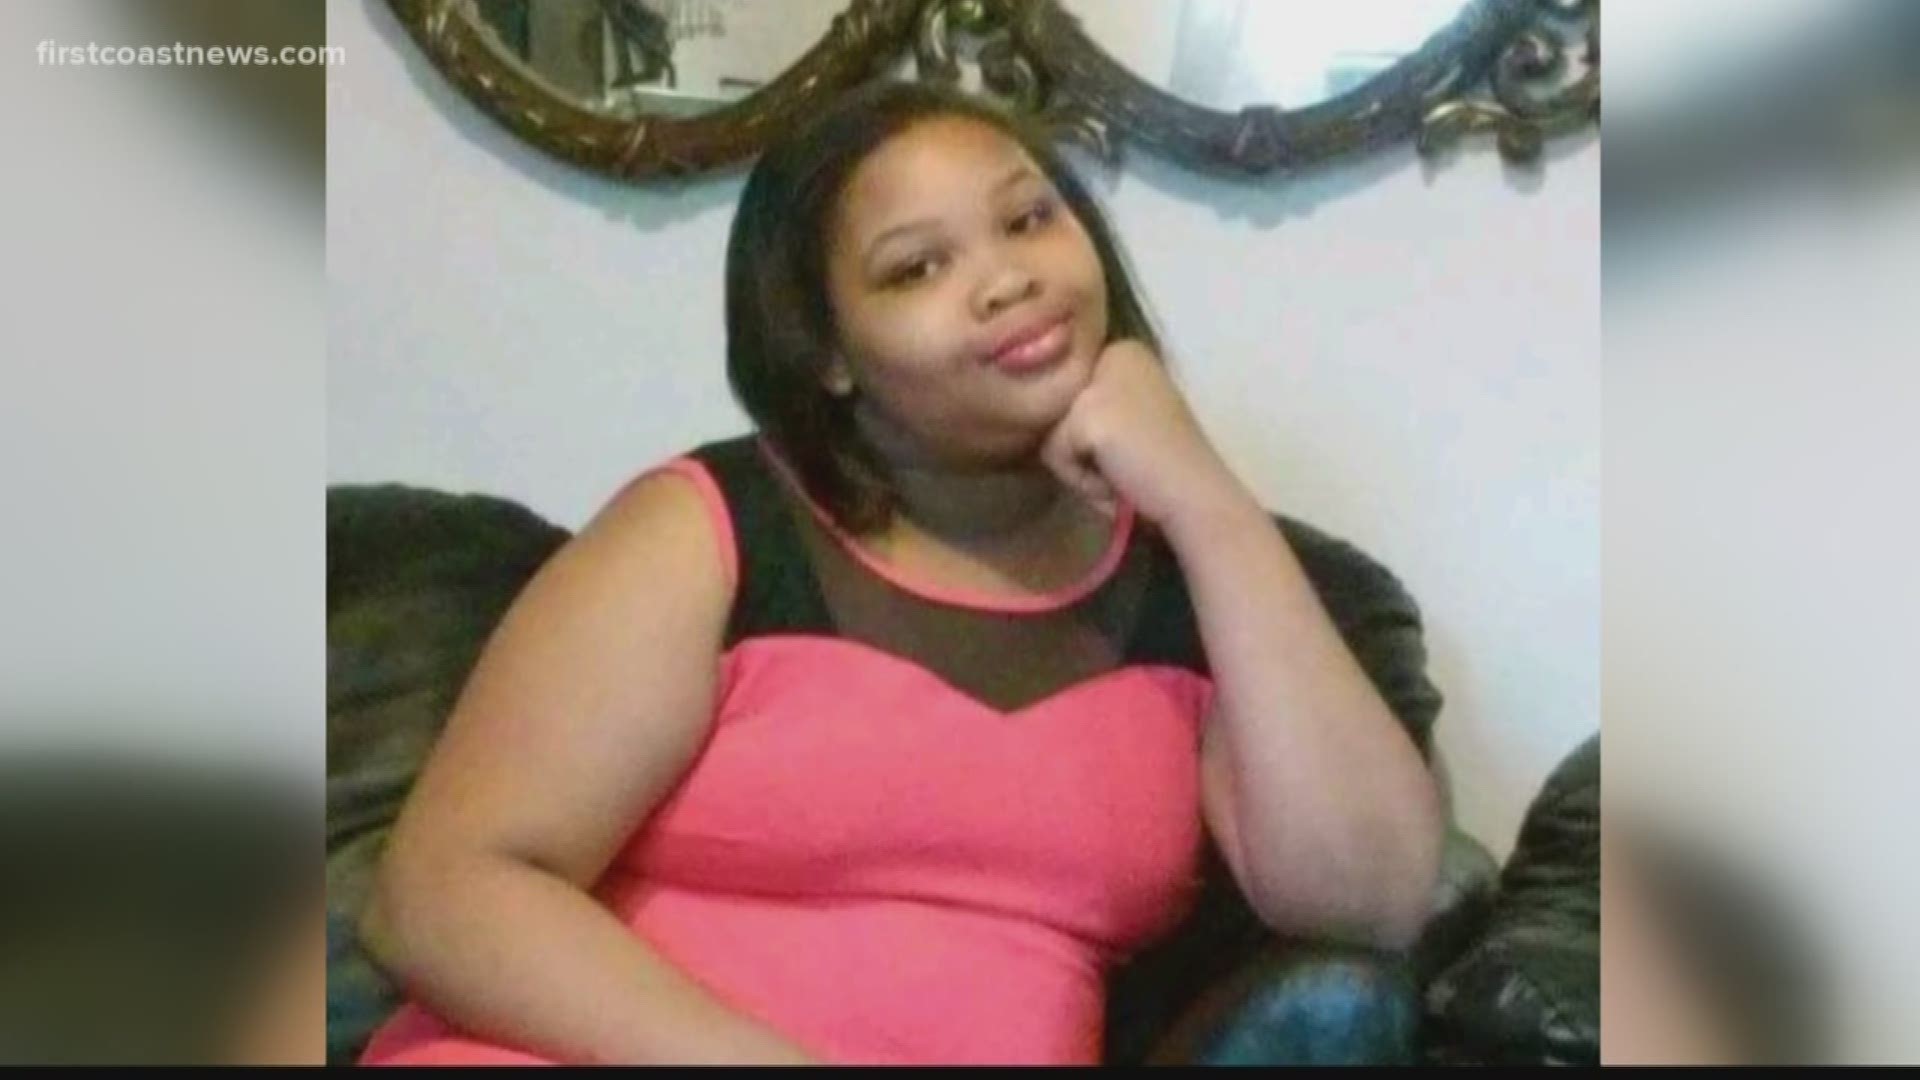 13-year-old Paris Byrd collapsed at Murray Middle School Tuesday.